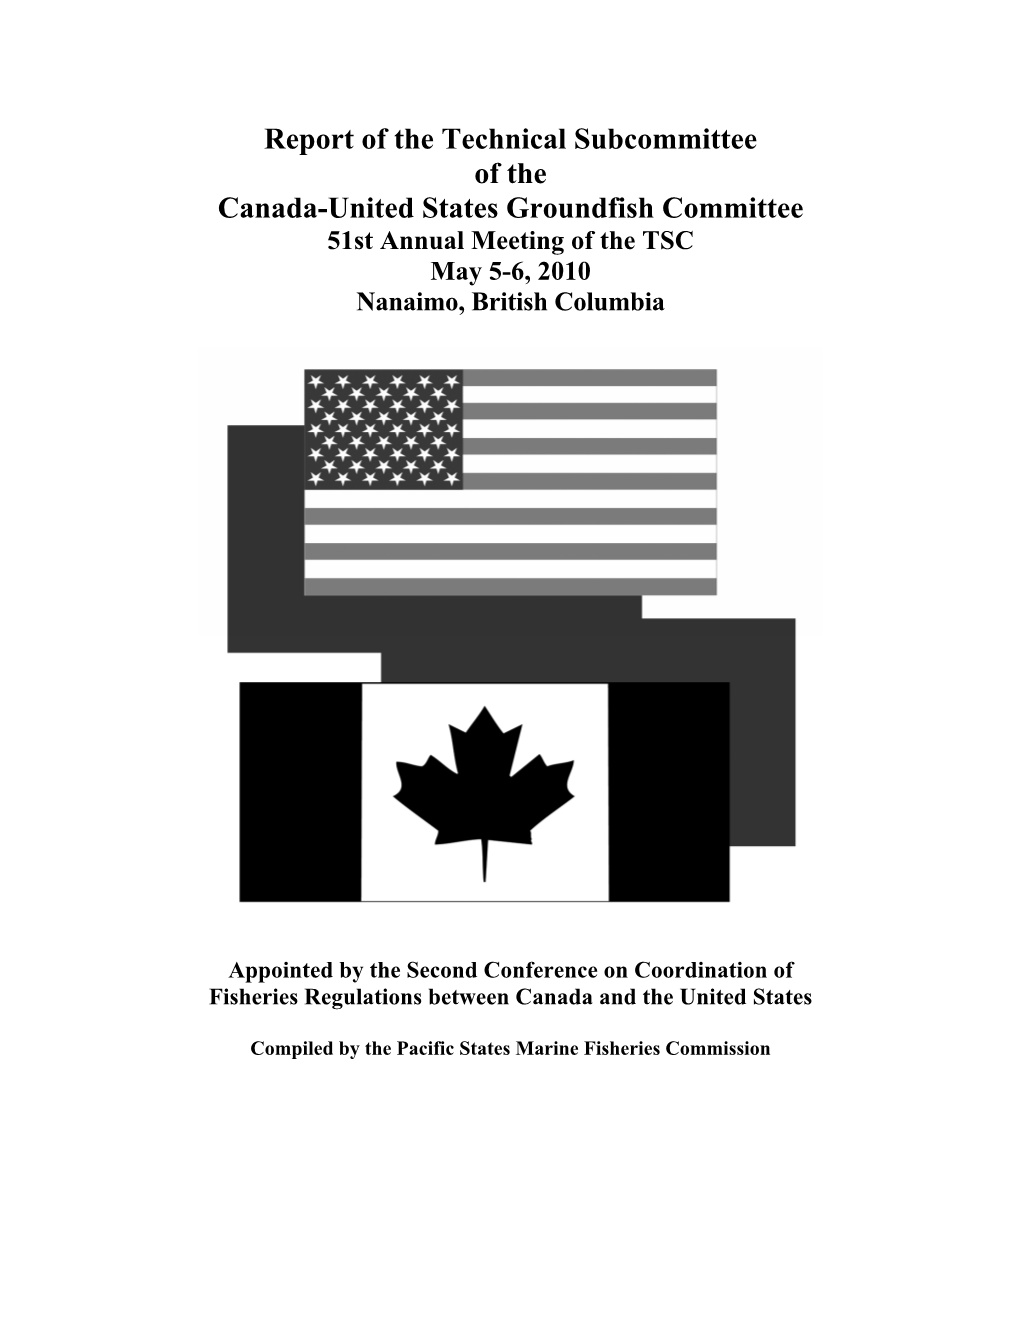 Report of the Technical Subcommittee of the Canada-United States Groundfish Committee 51St Annual Meeting of the TSC May 5-6, 2010 Nanaimo, British Columbia